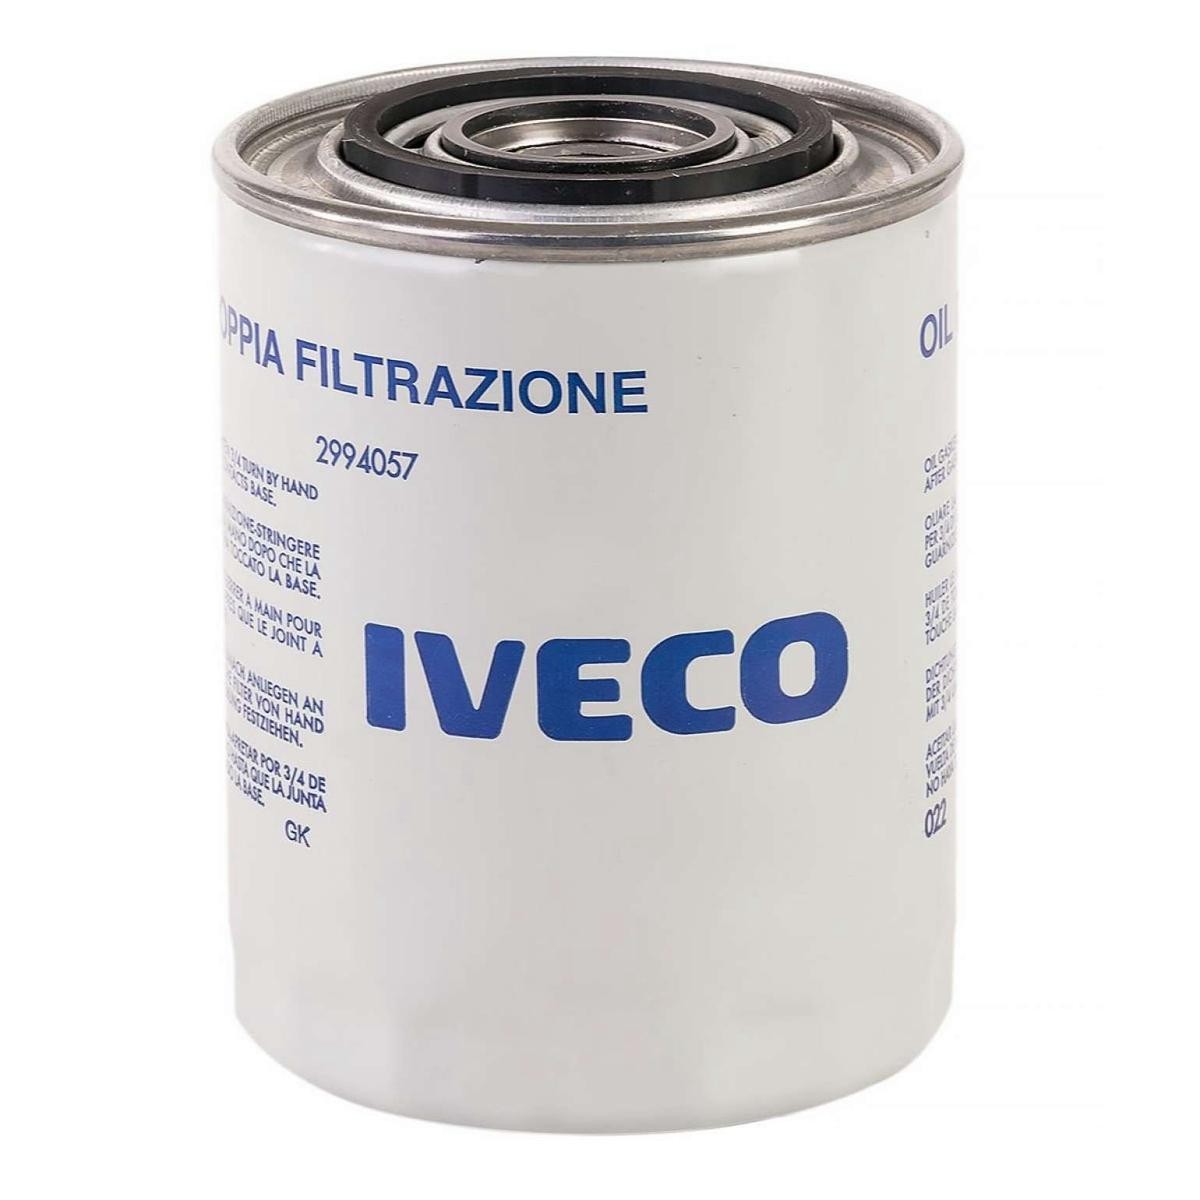 IVECO 2994057 Oil filter 01902 047